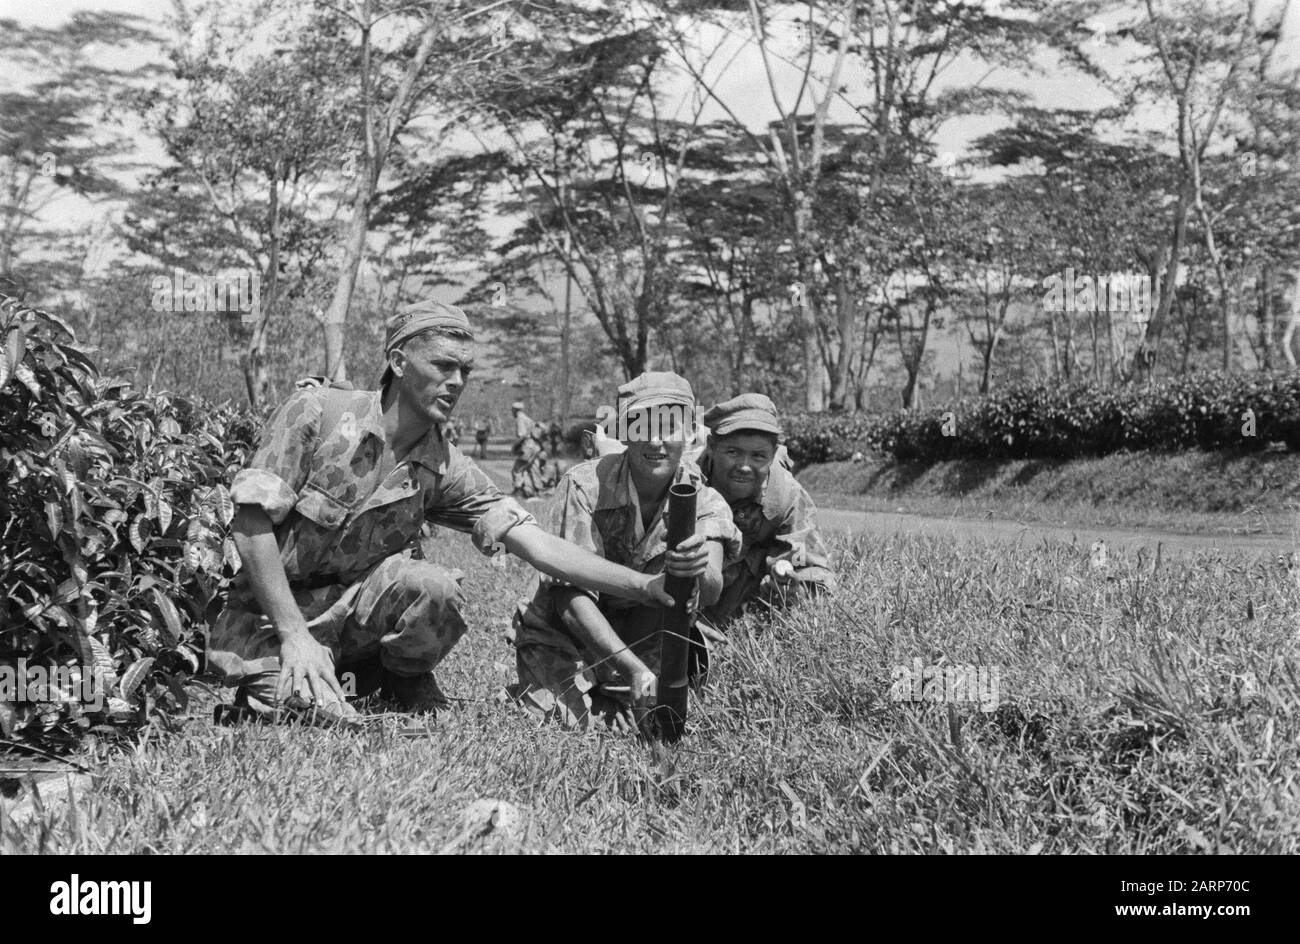 Three Dutch soldiers with a light mortar in the field Date: 1947/01/01 Location: Indonesia, Dutch East Indies Stock Photo